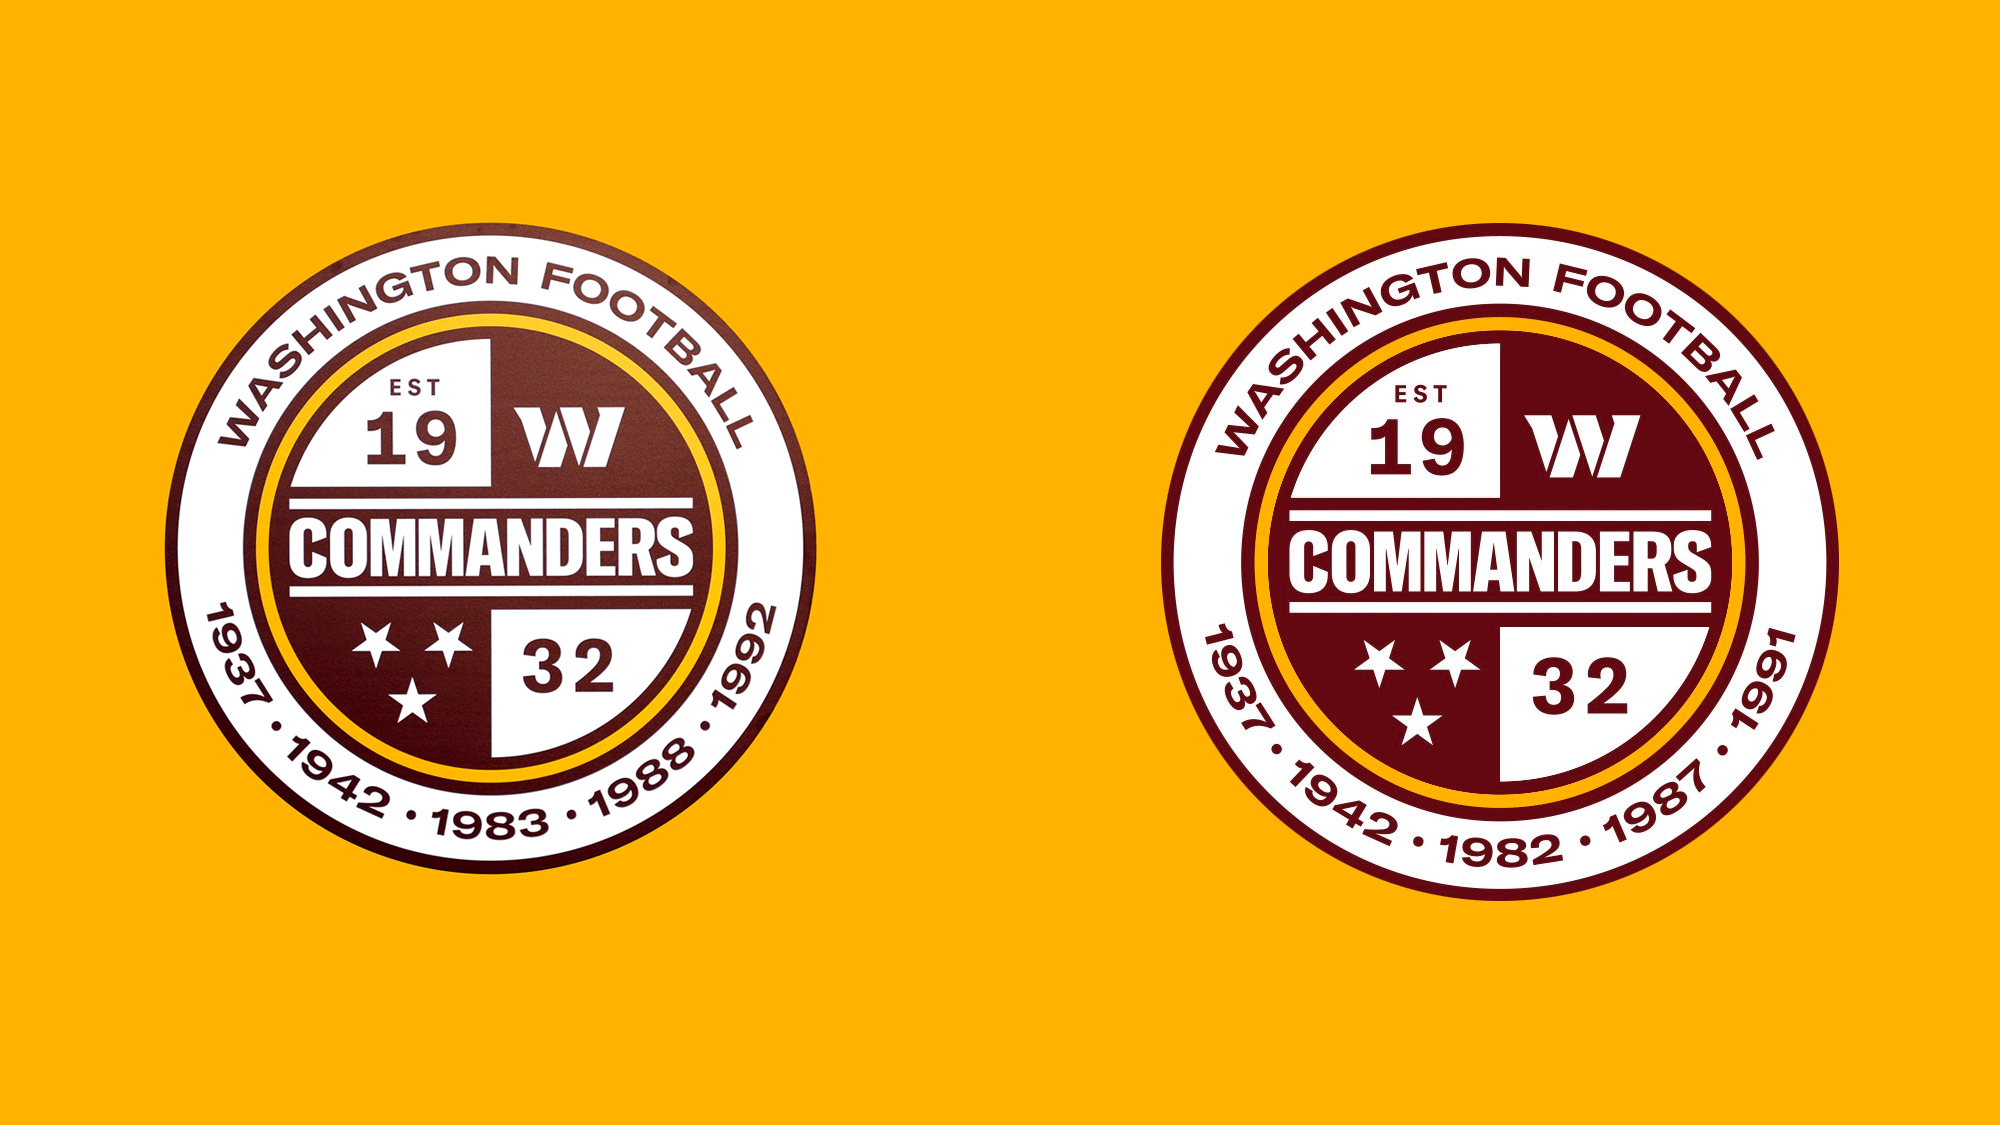 Why the Washington Commanders Rebrand Missed the Mark